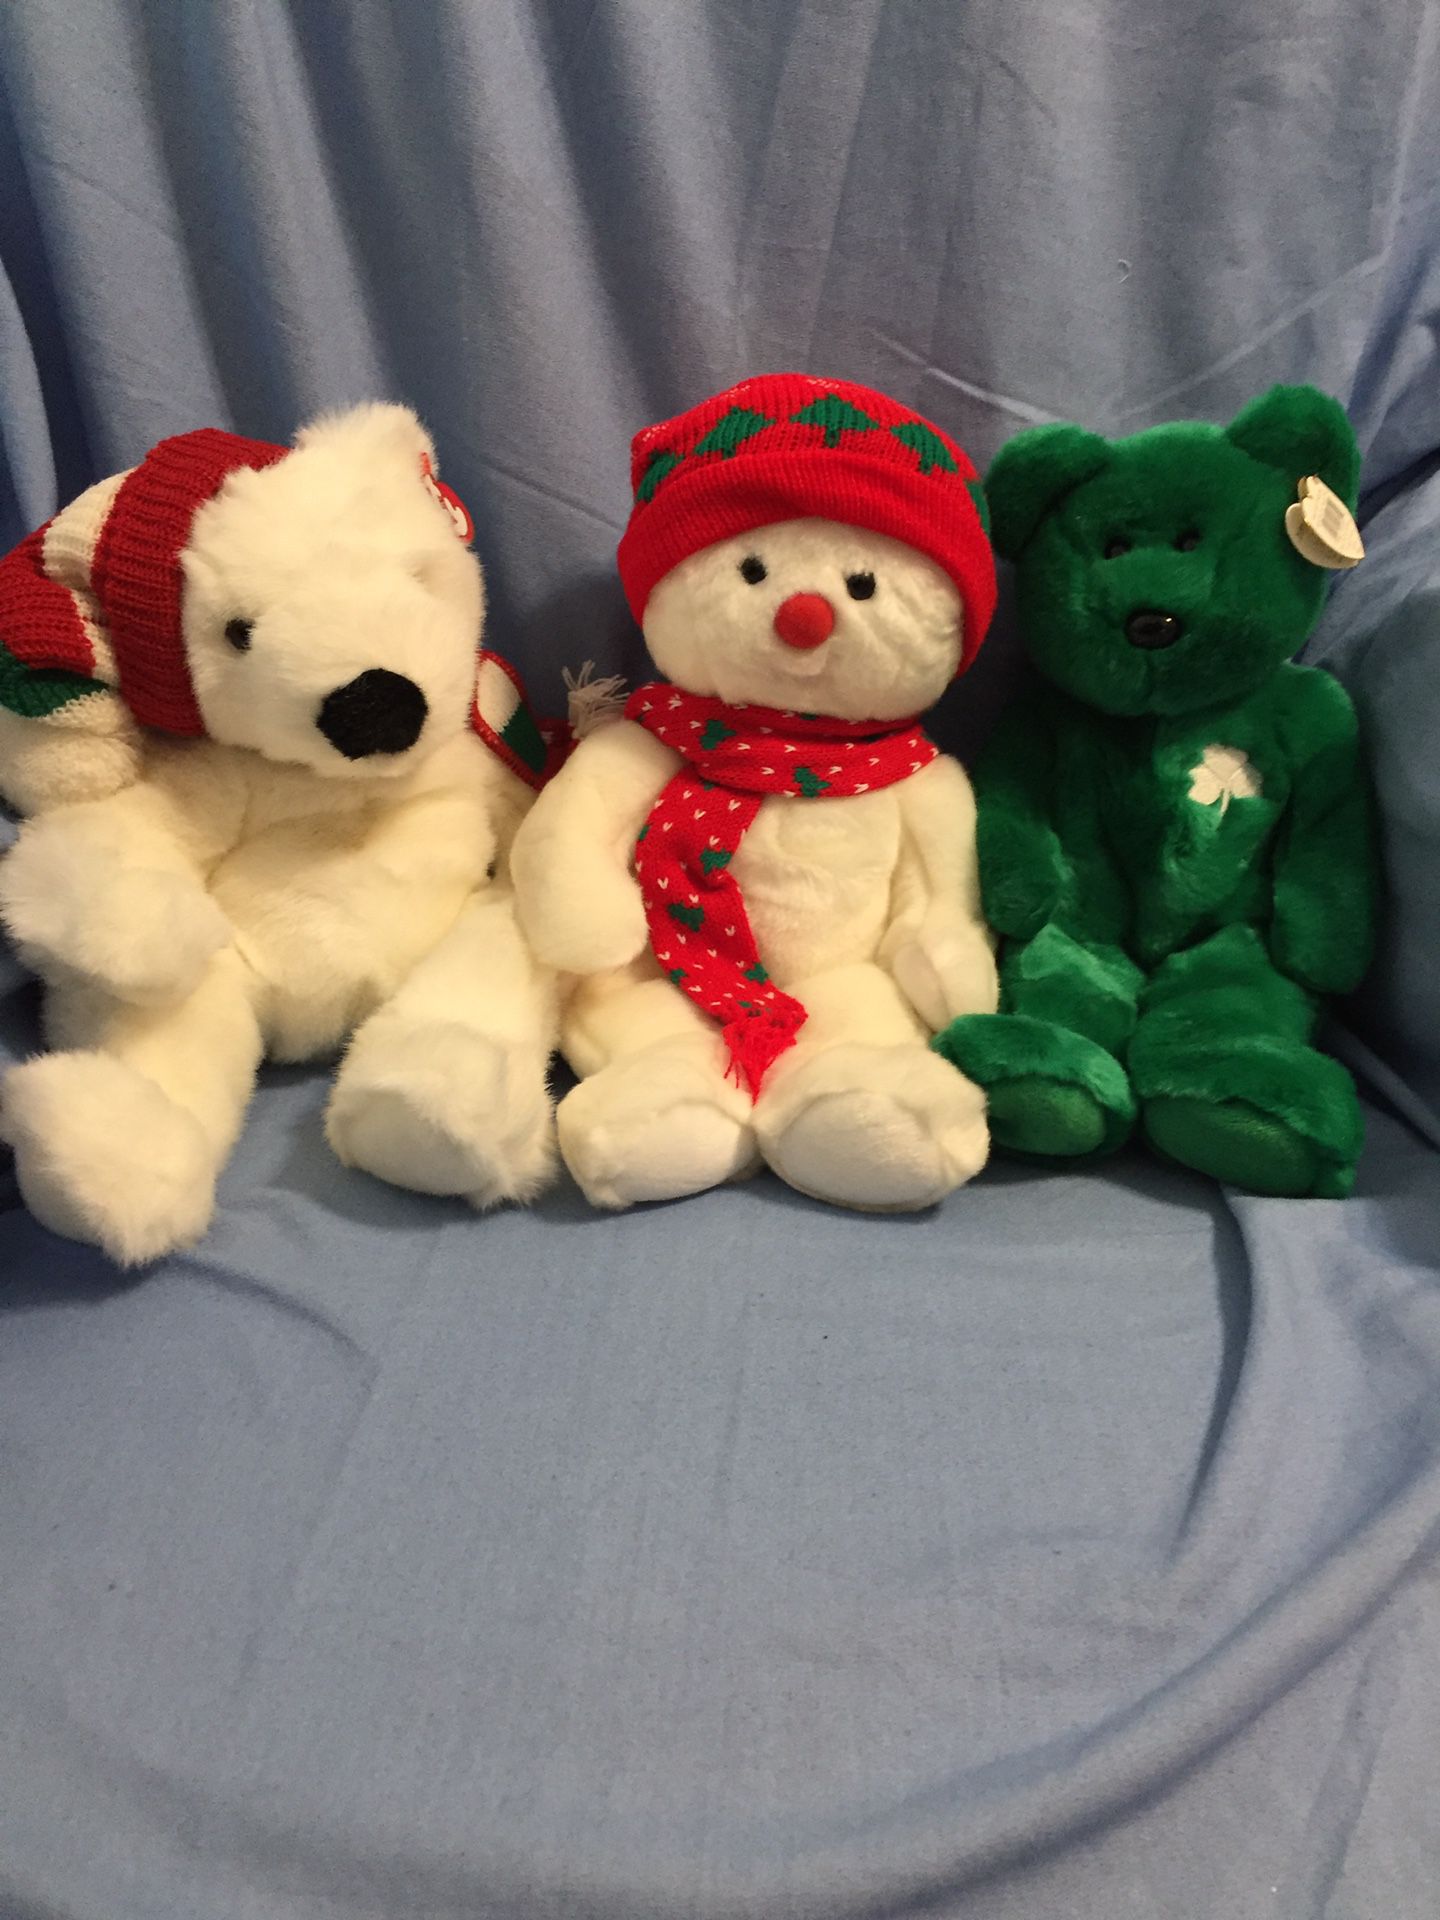 Like New! Christmas/St. Patrick’s Day Ty beanie buddies with tags-snowman and two bears